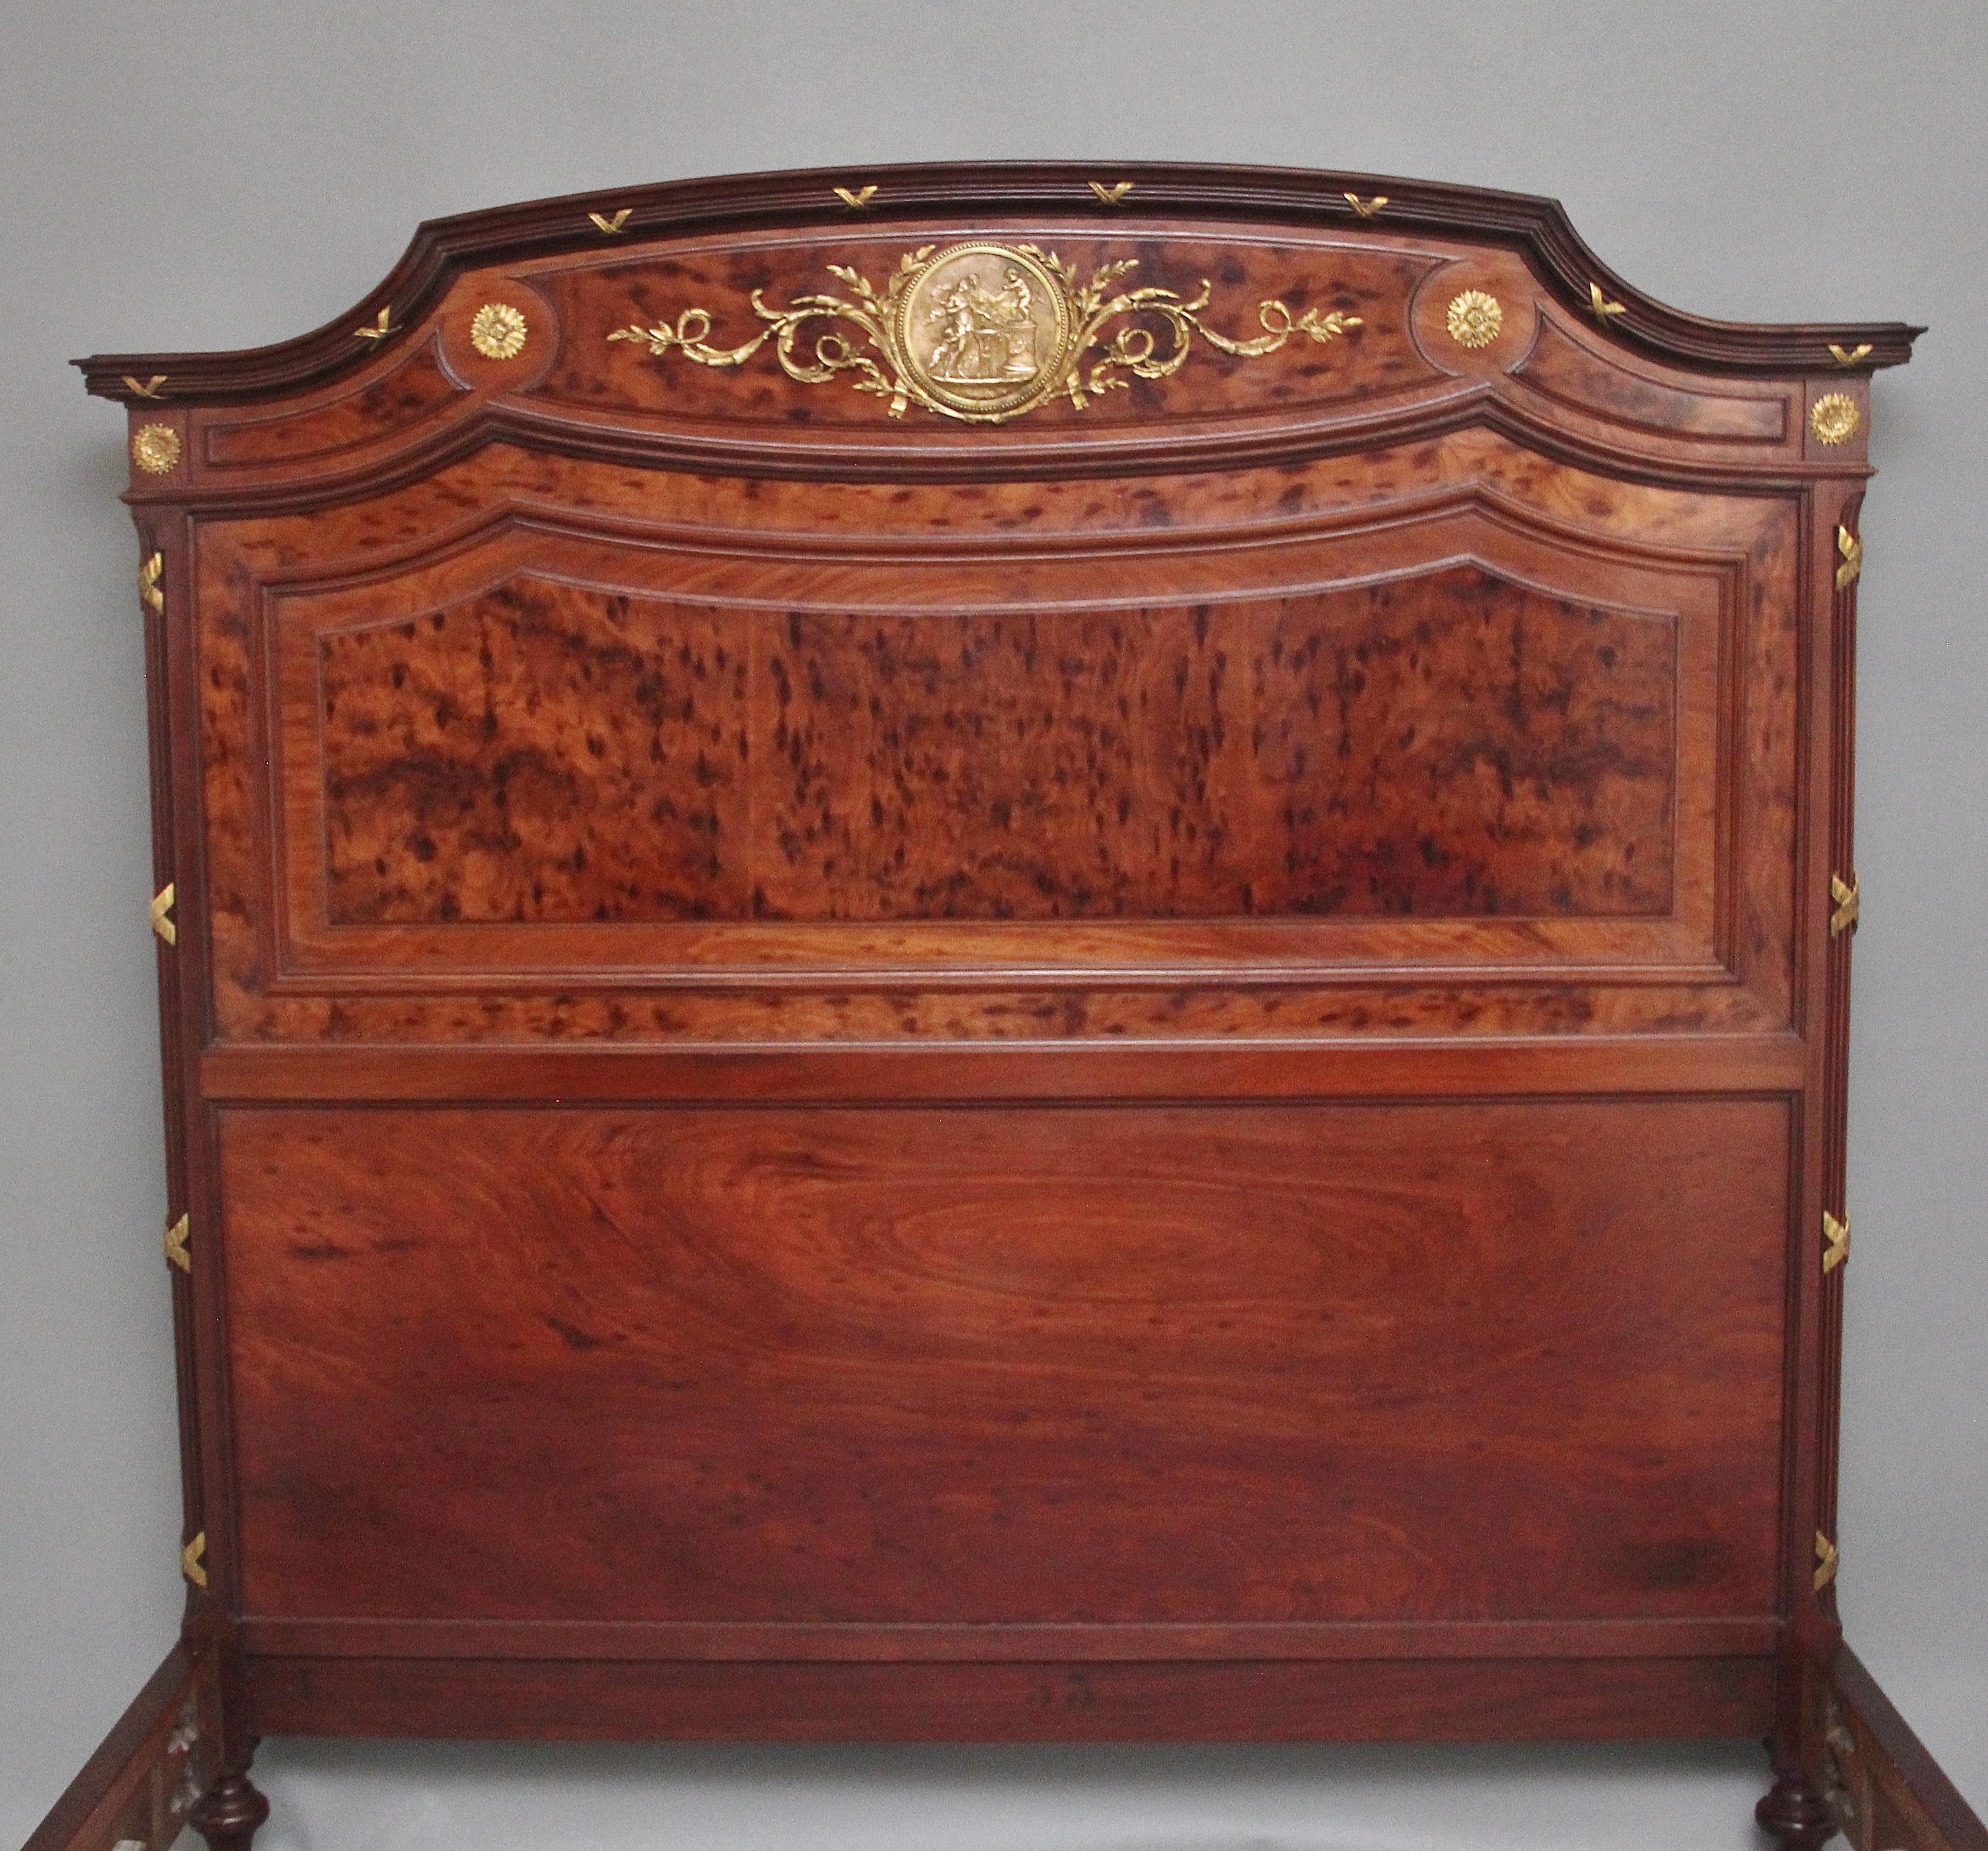 A fabulous quality 19th Century French plum pudding mahogany and brass bed in the Neoclassical style, the tall headboard having a shaped and reeded top with ormolu decoration, the sides in the same manor as the top but with canted corners,the large